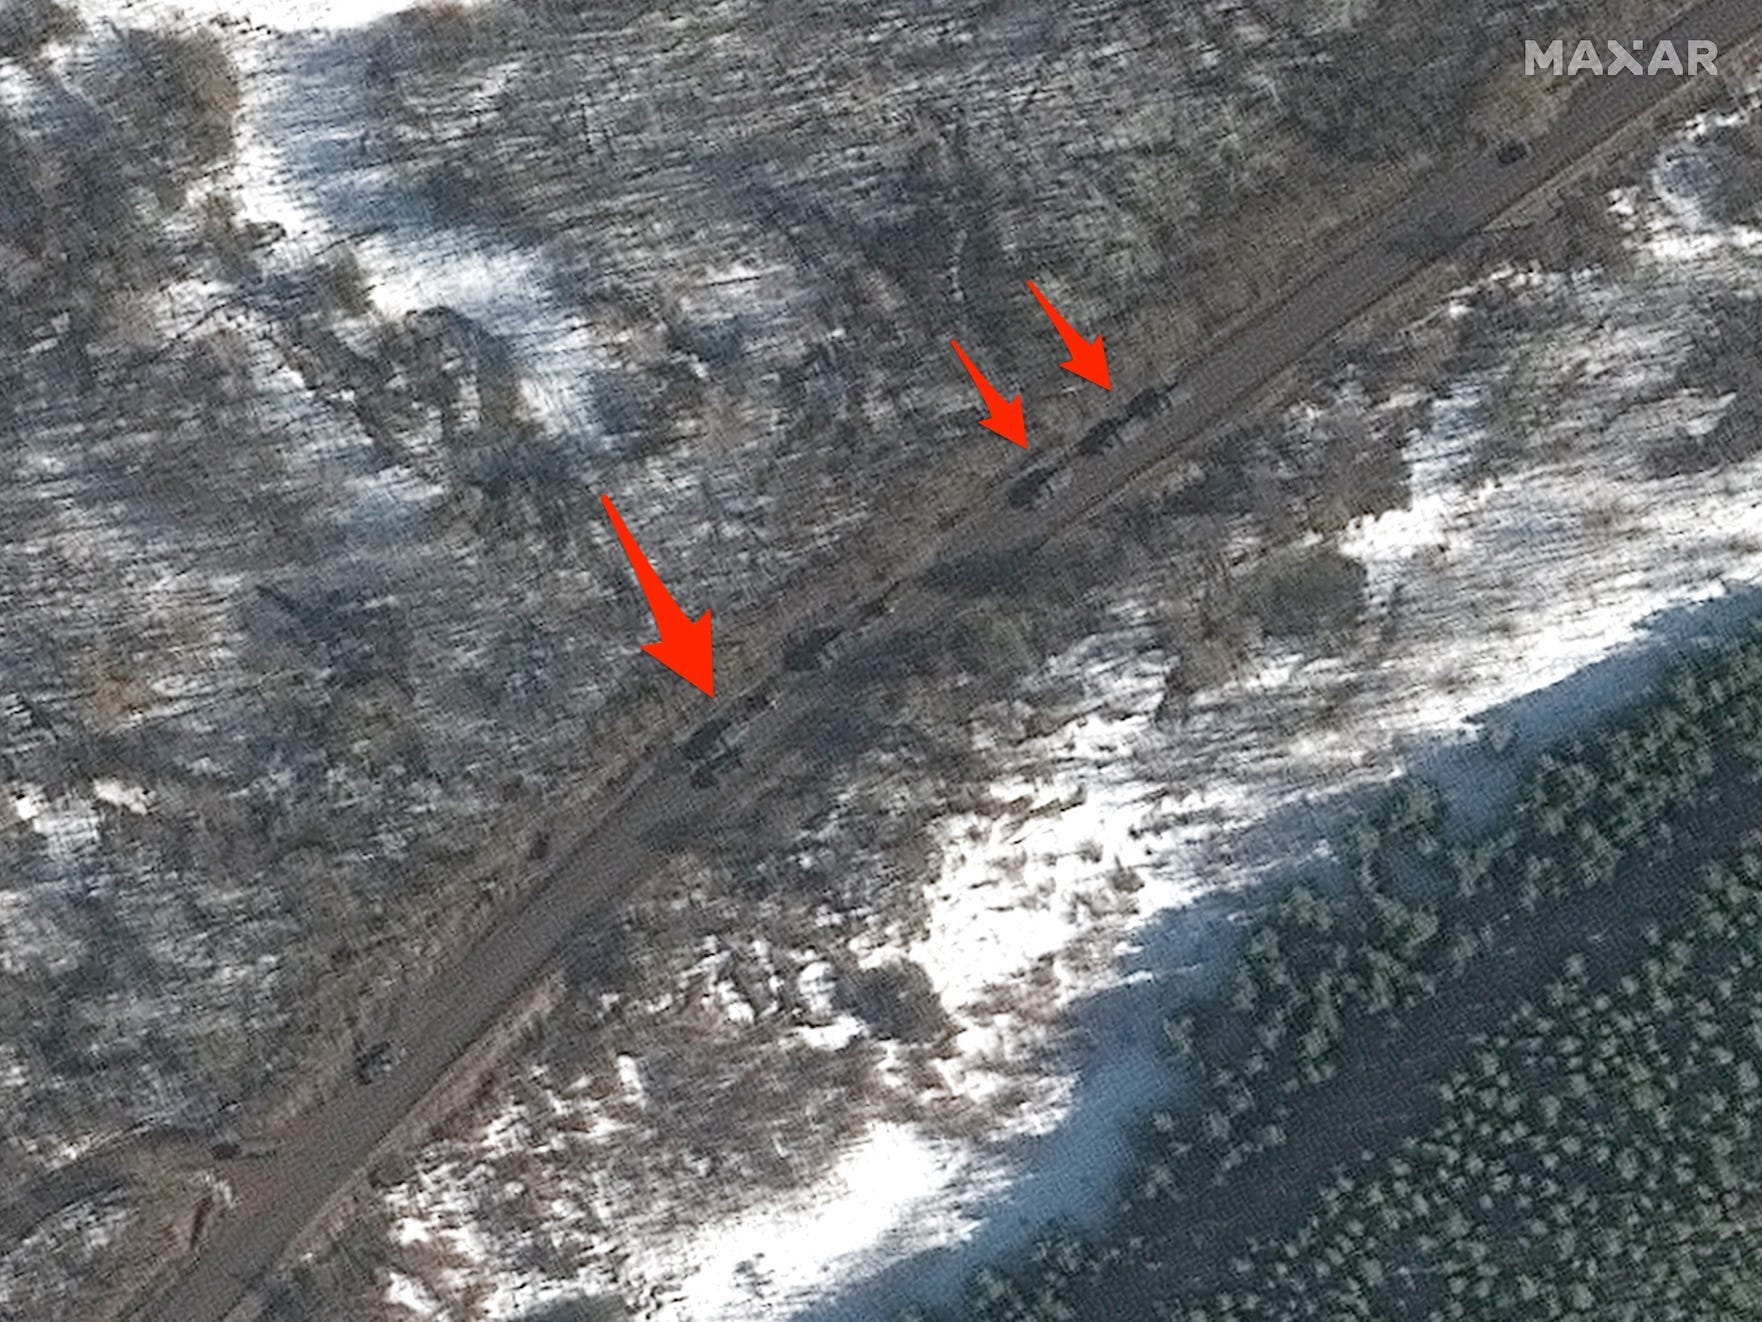 military vehicles are show on a road among a snowy forest as seen in a satellite image